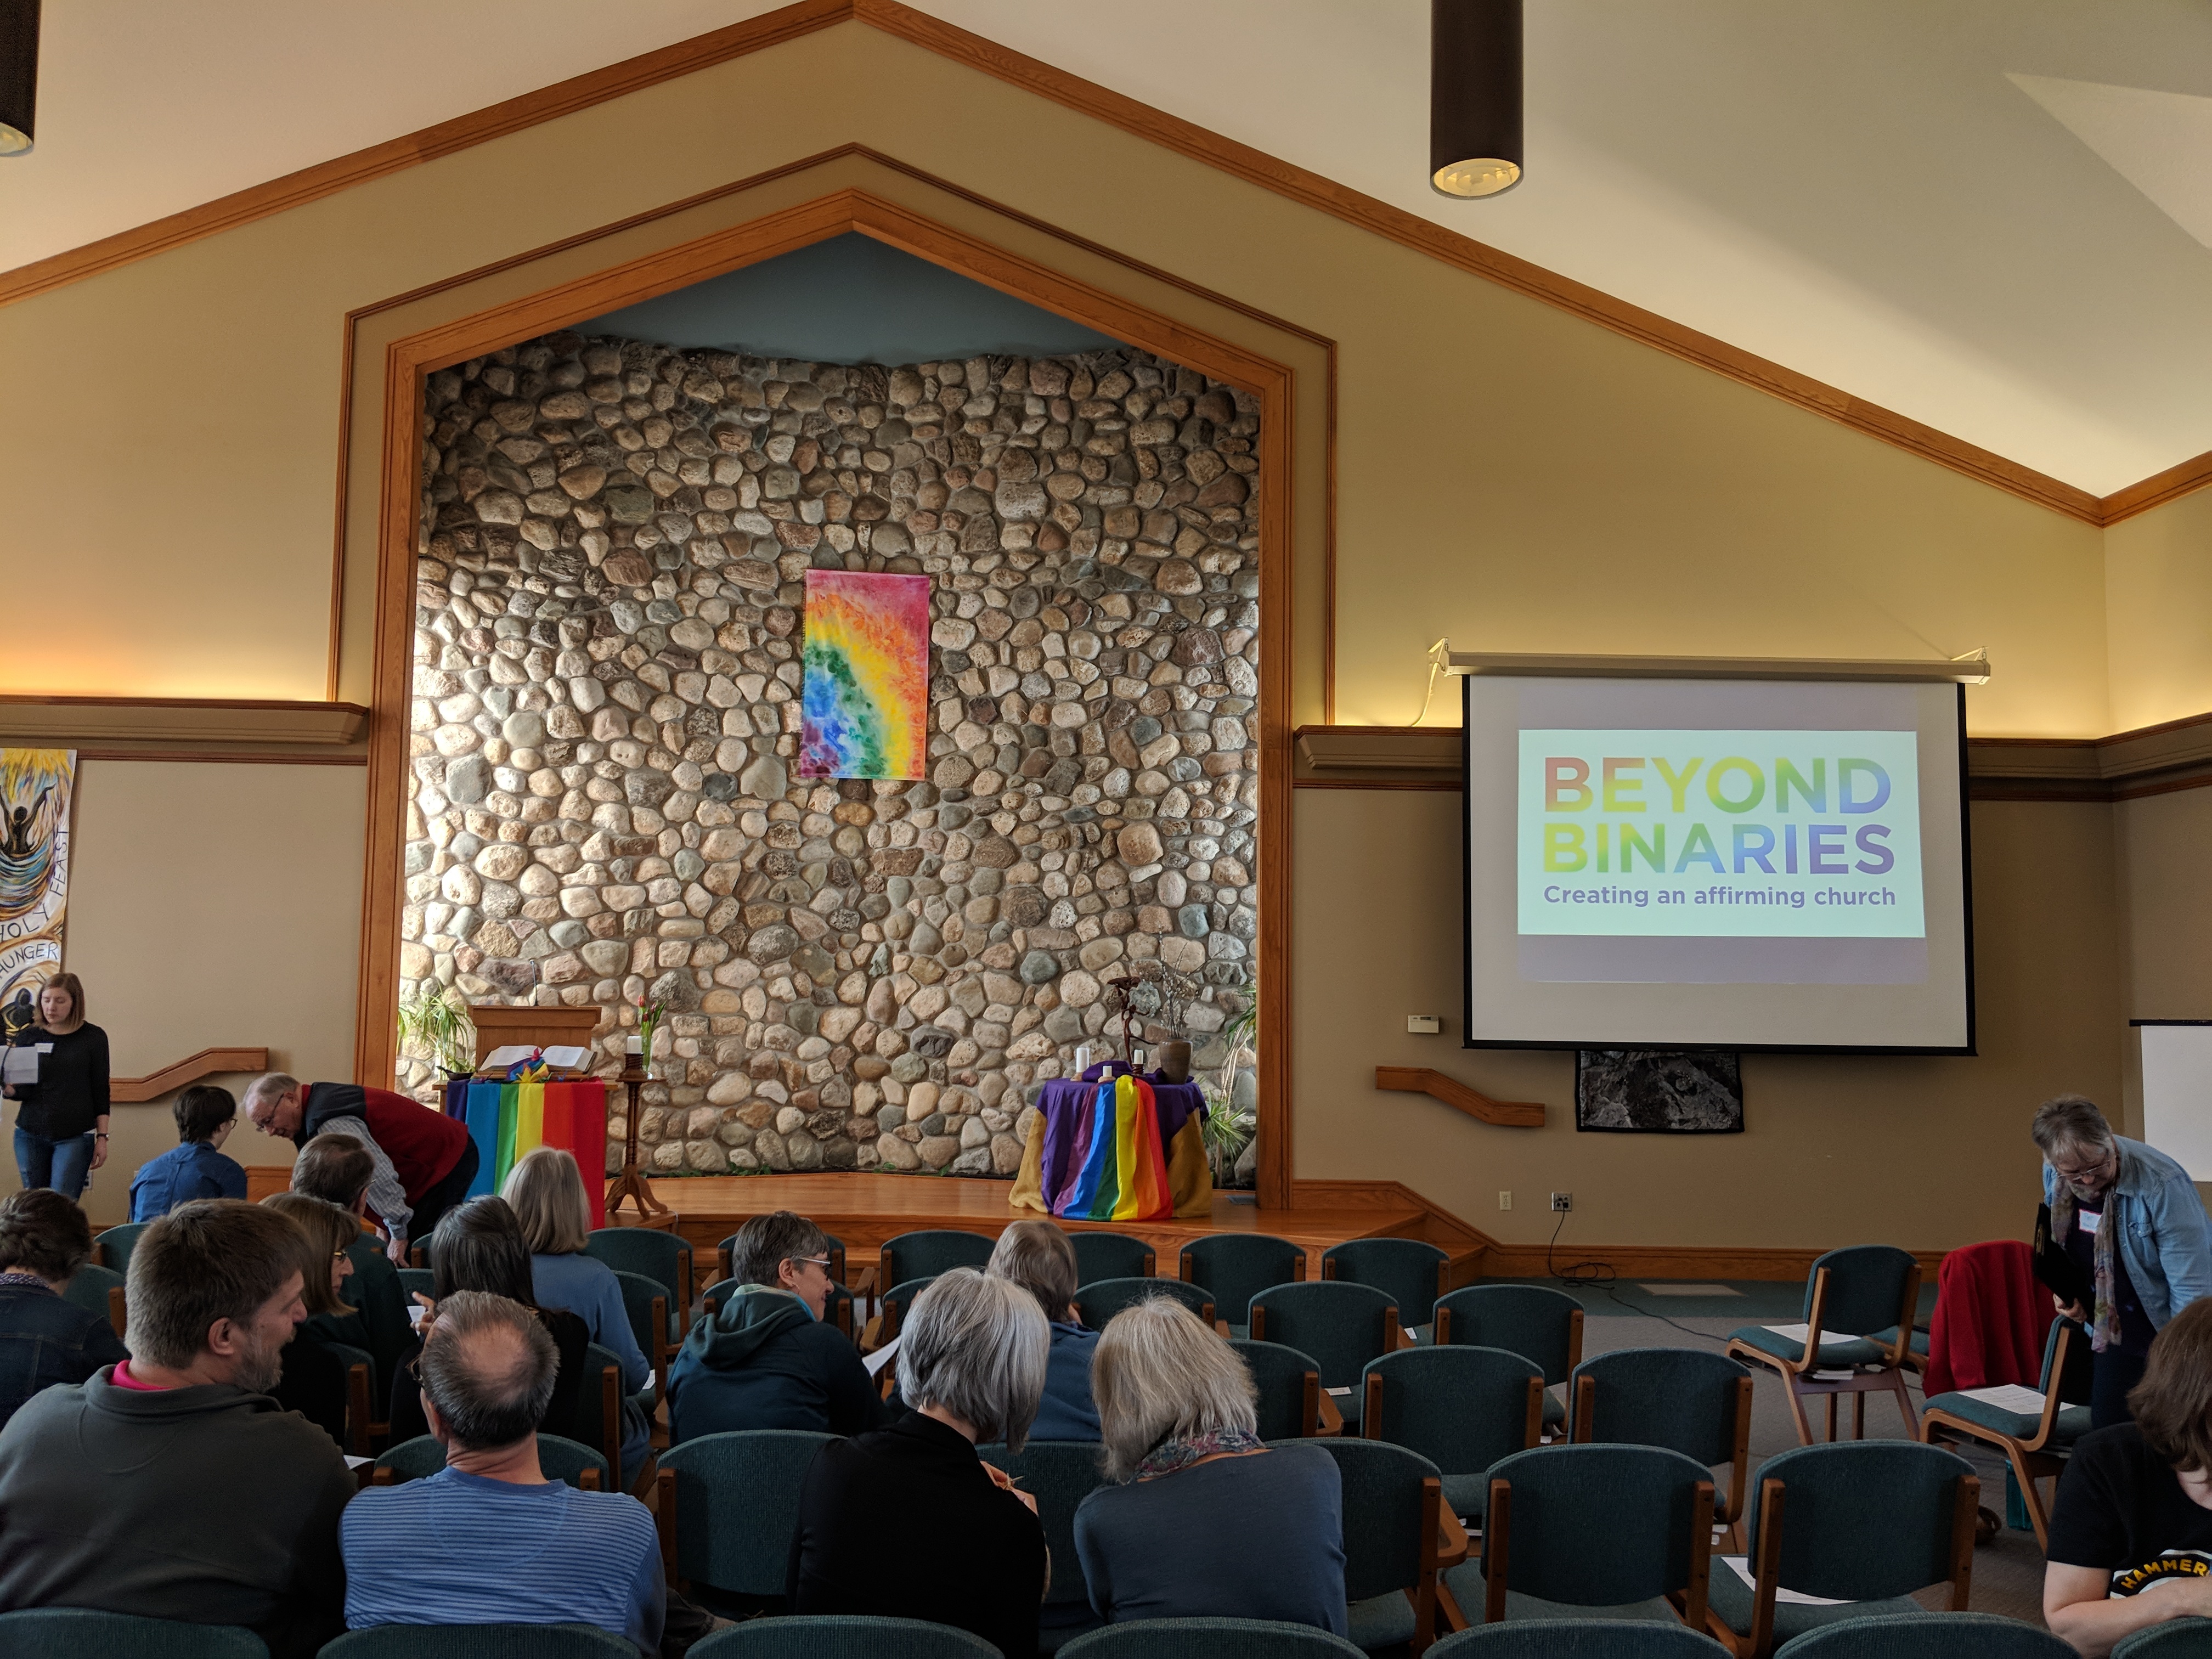 Beyond Binaries event by Pastors in Exile, where In This Together was born